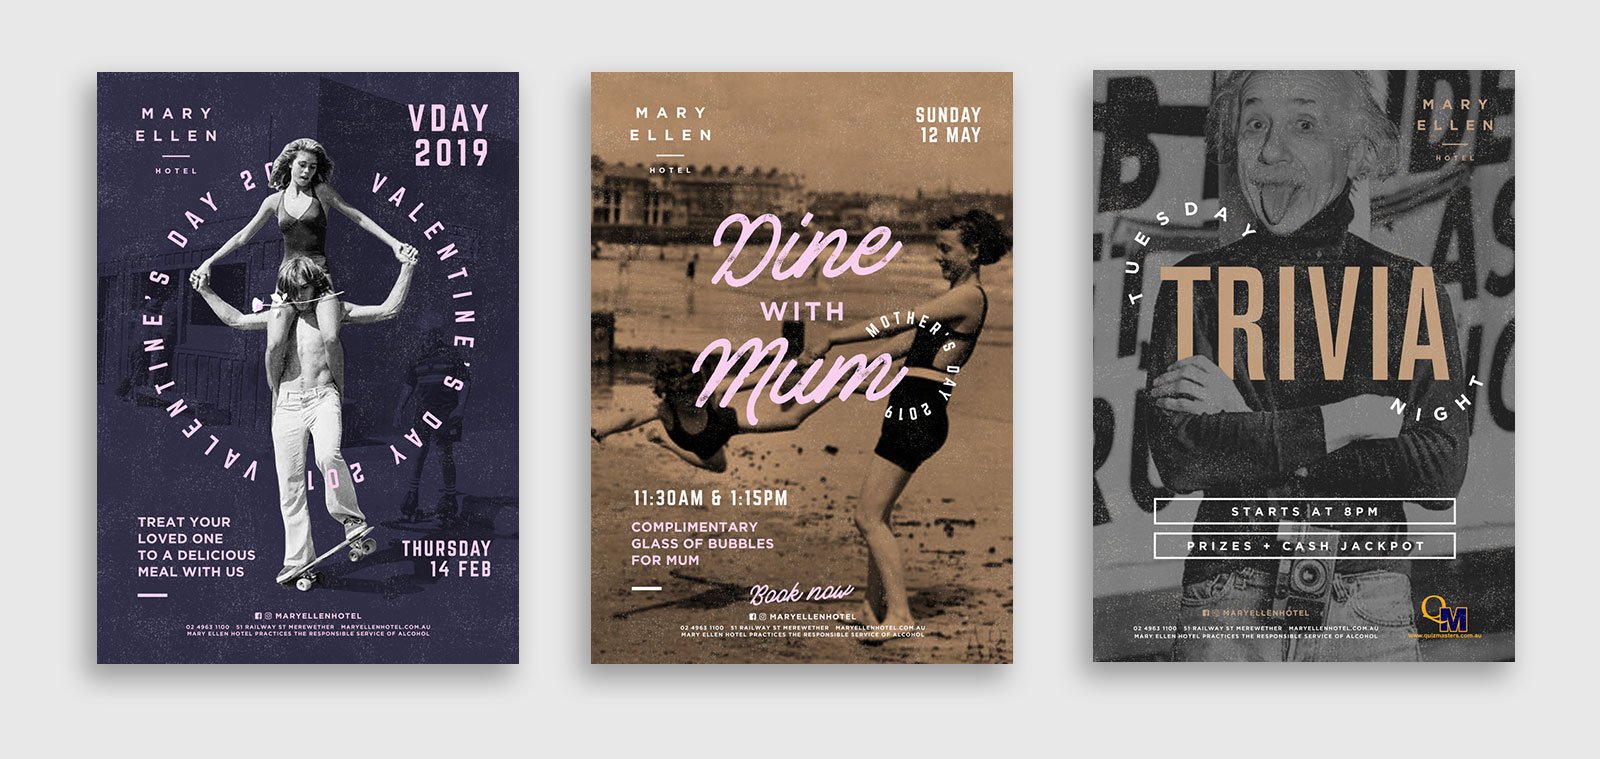 Three poster designs for Mary Ellen Hotel 